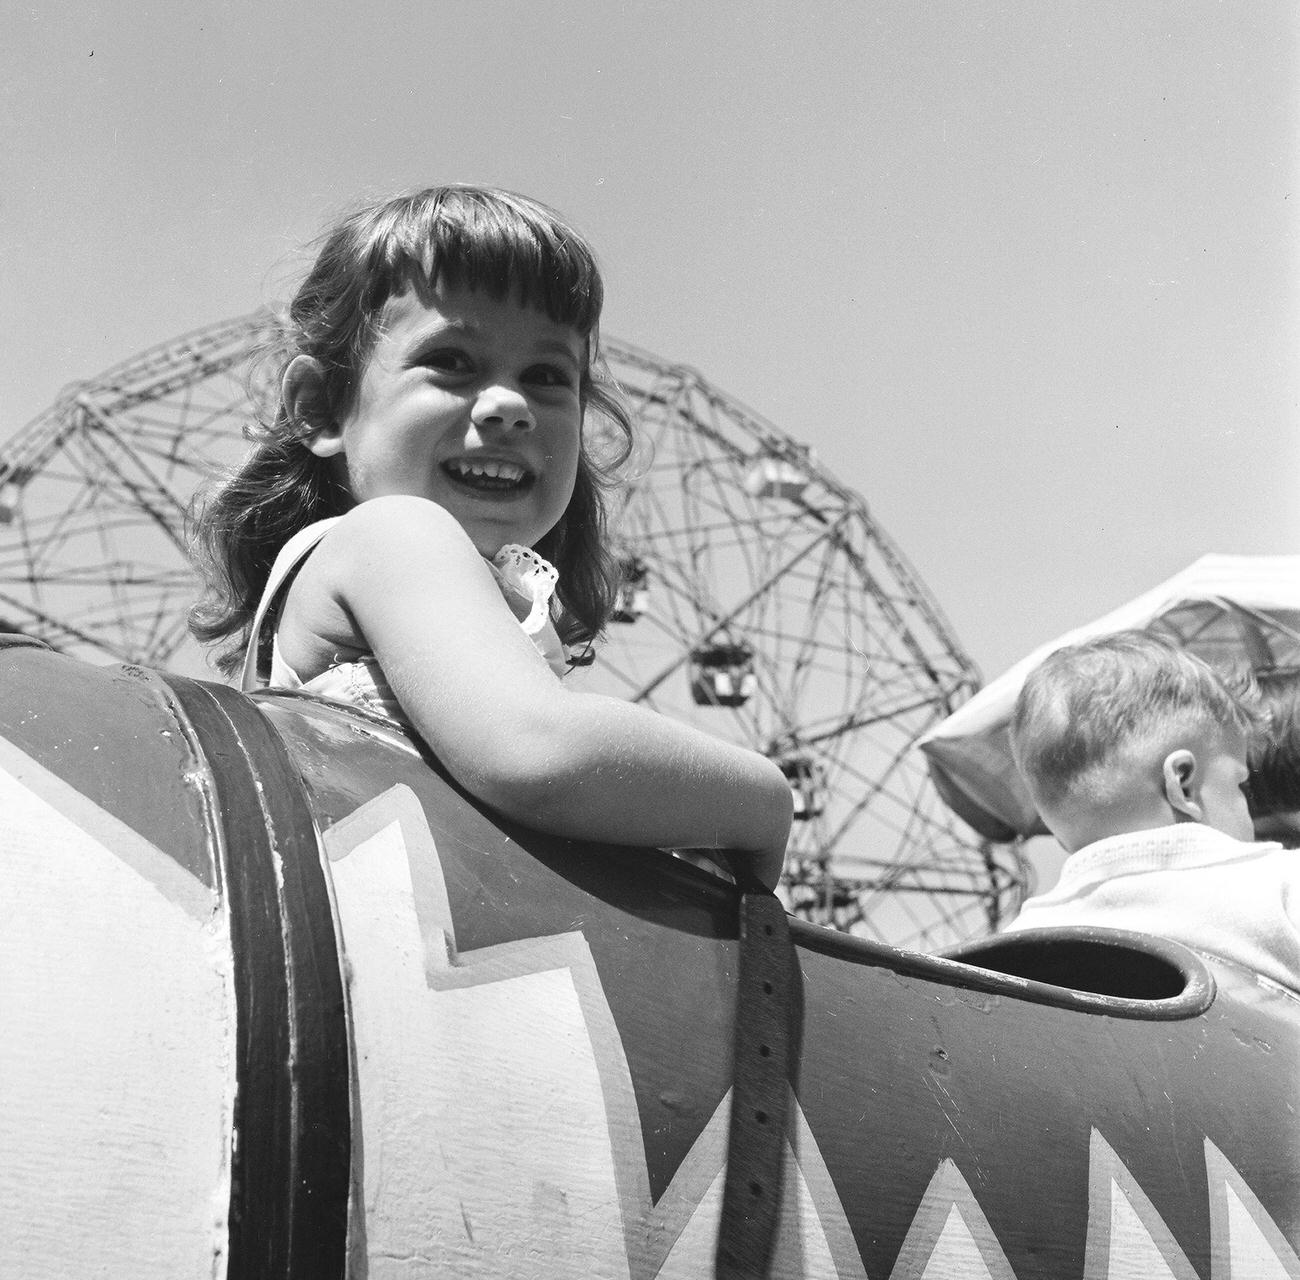 Girl In Front Of Ferris Wheel At Amusement Park, 1948